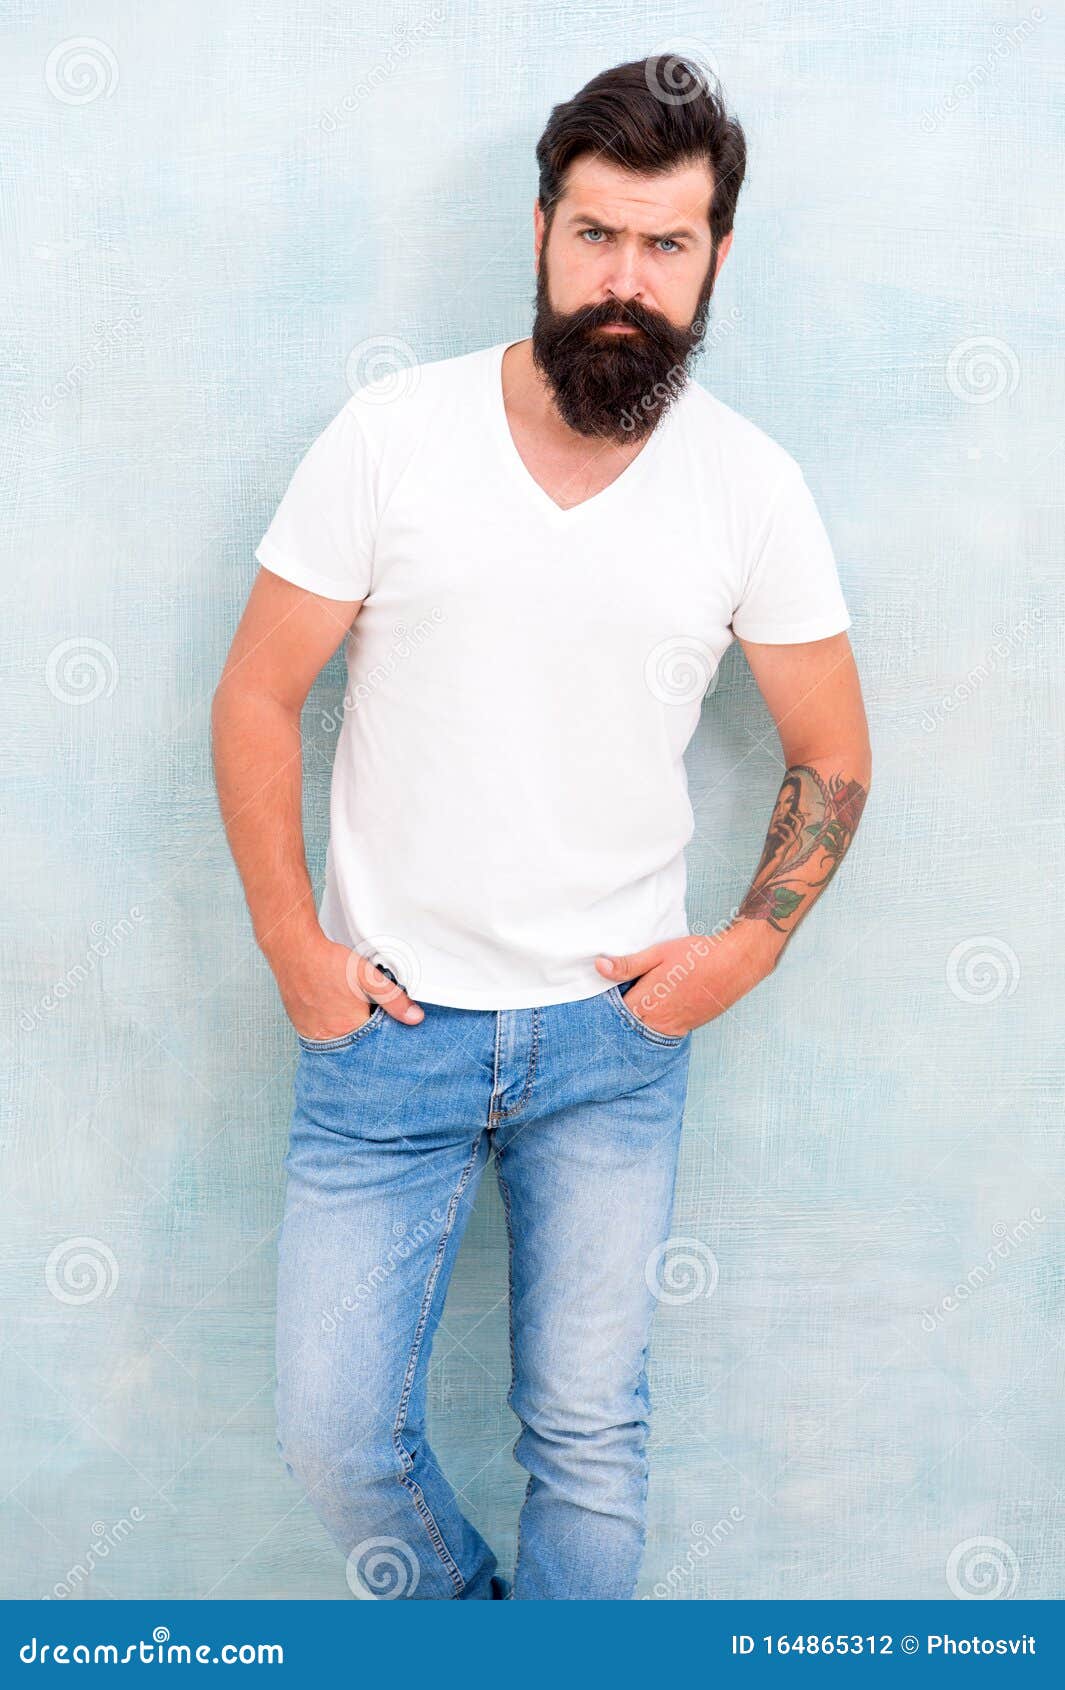 Ambitious Guy. Bearded Man Radiate Masculinity. Physical Attractiveness ...